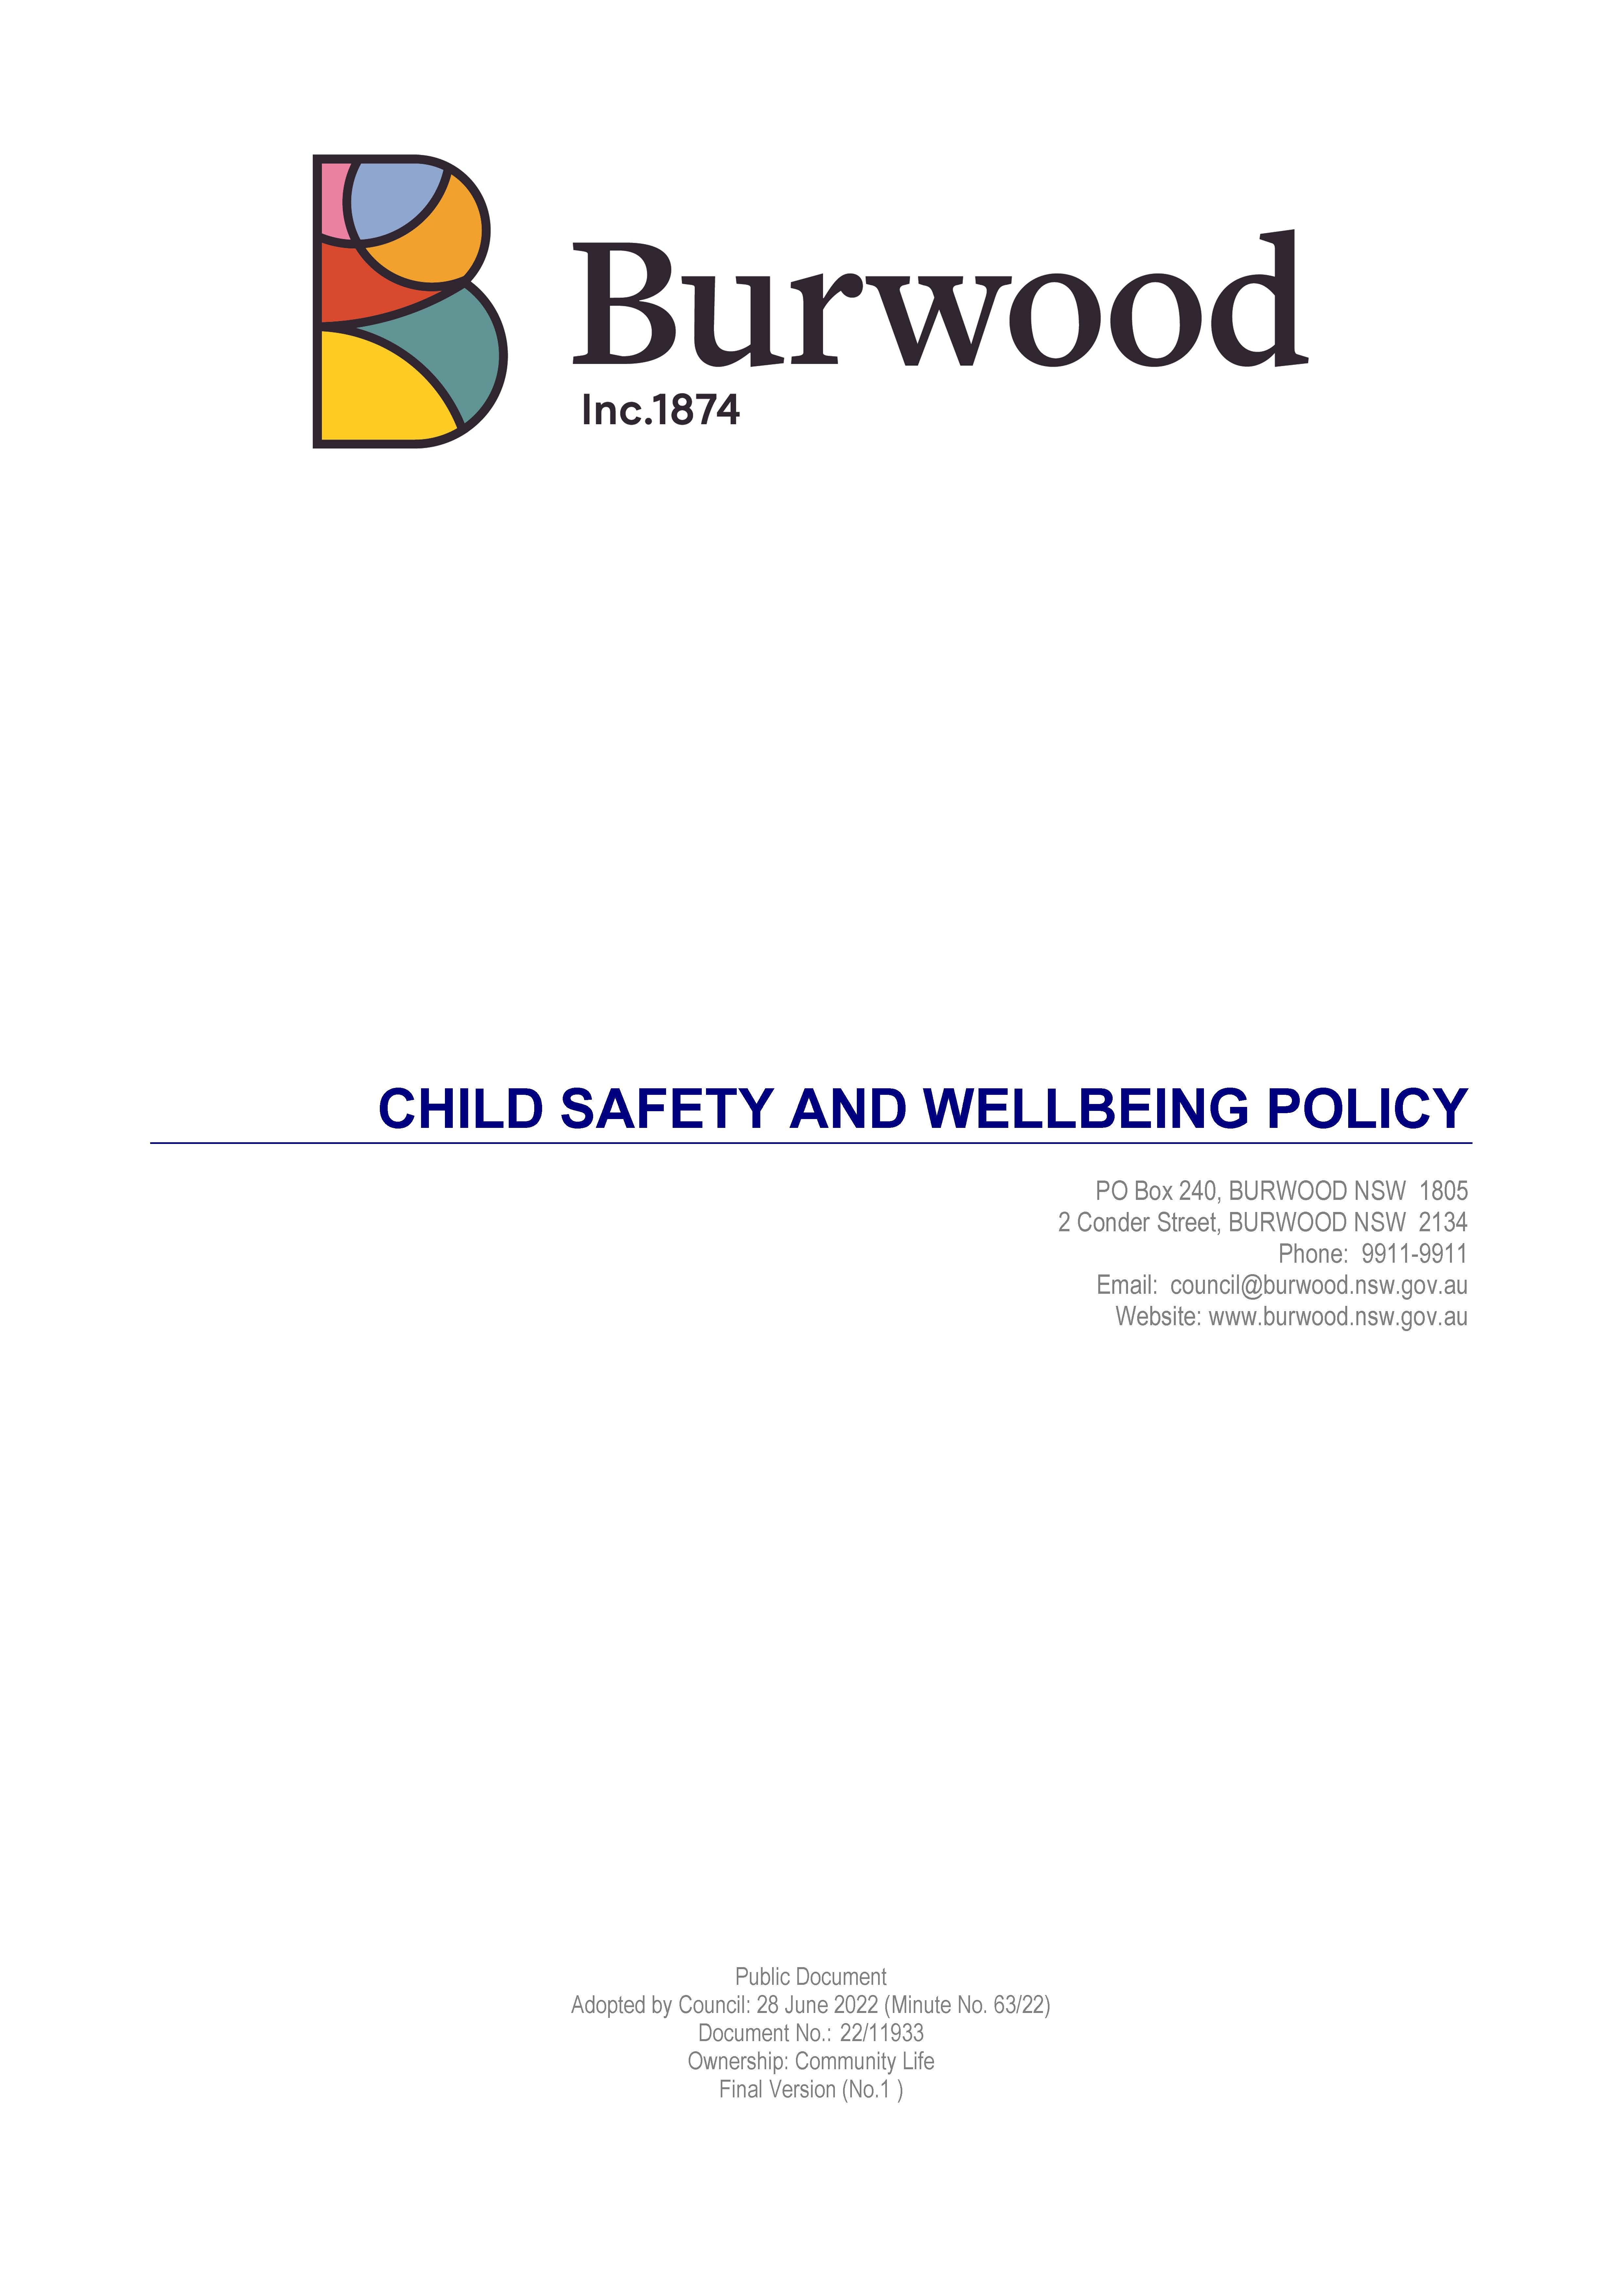 Child-Safety-and-Wellbeing-Policy-Adopted-by-Council-28-June-2022_1_Page_1.jpg